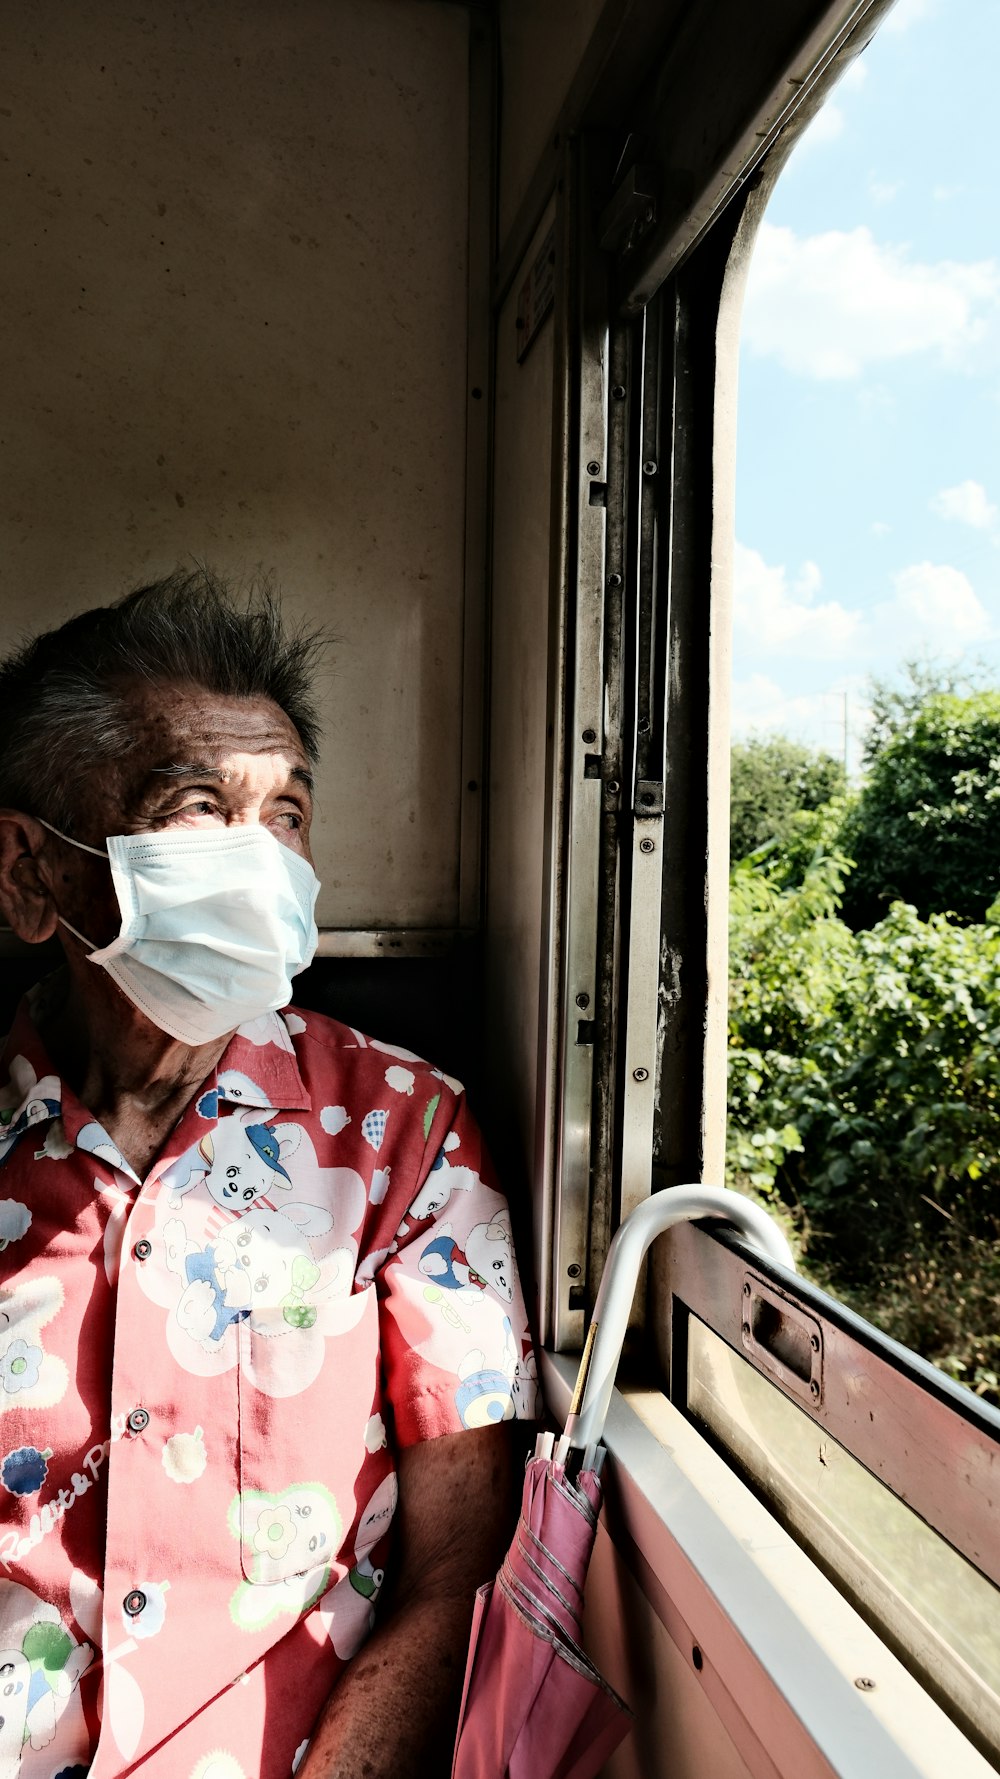 a man wearing a face mask on a train